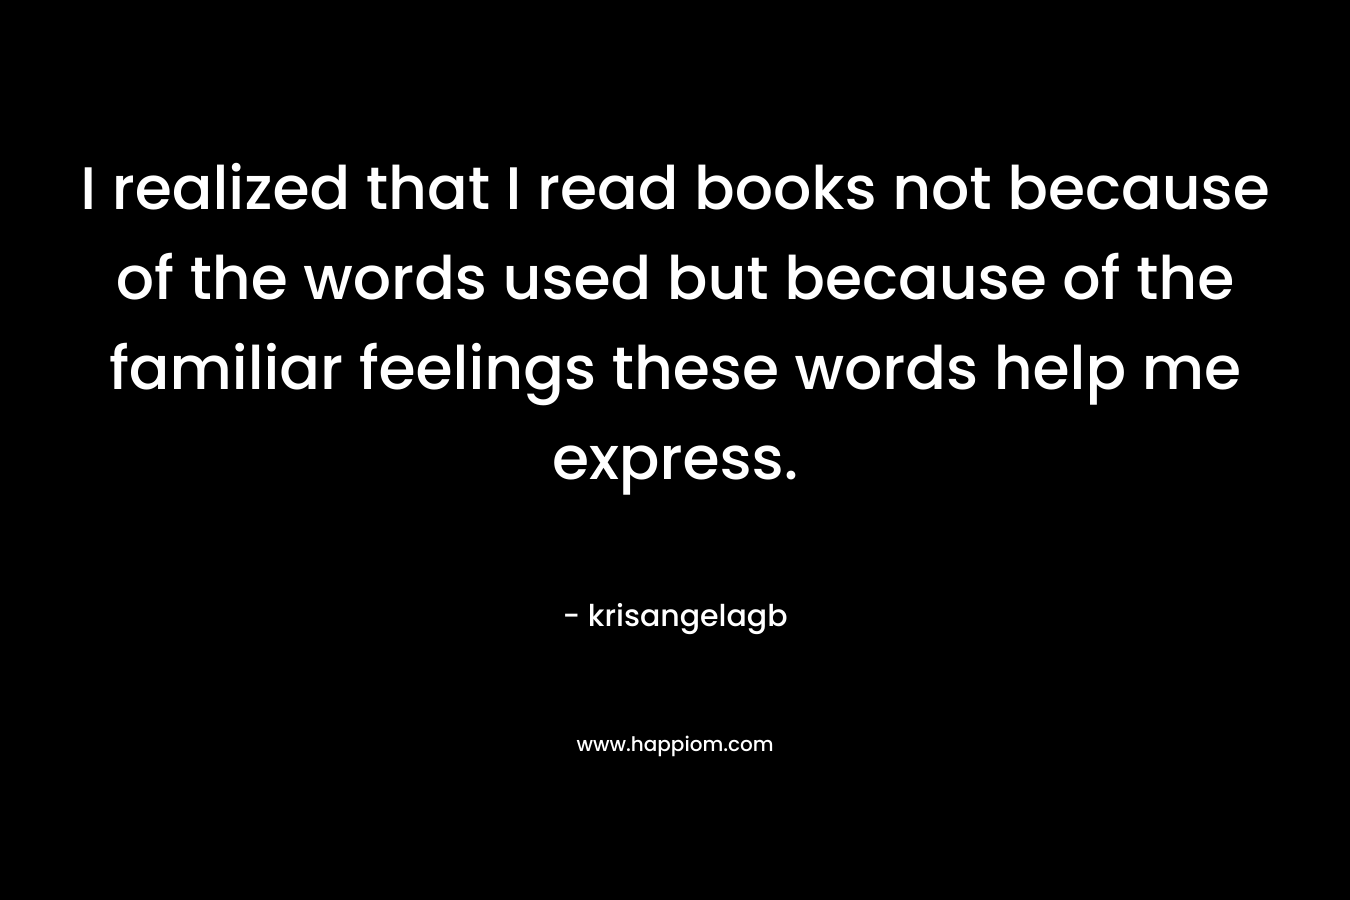 I realized that I read books not because of the words used but because of the familiar feelings these words help me express.